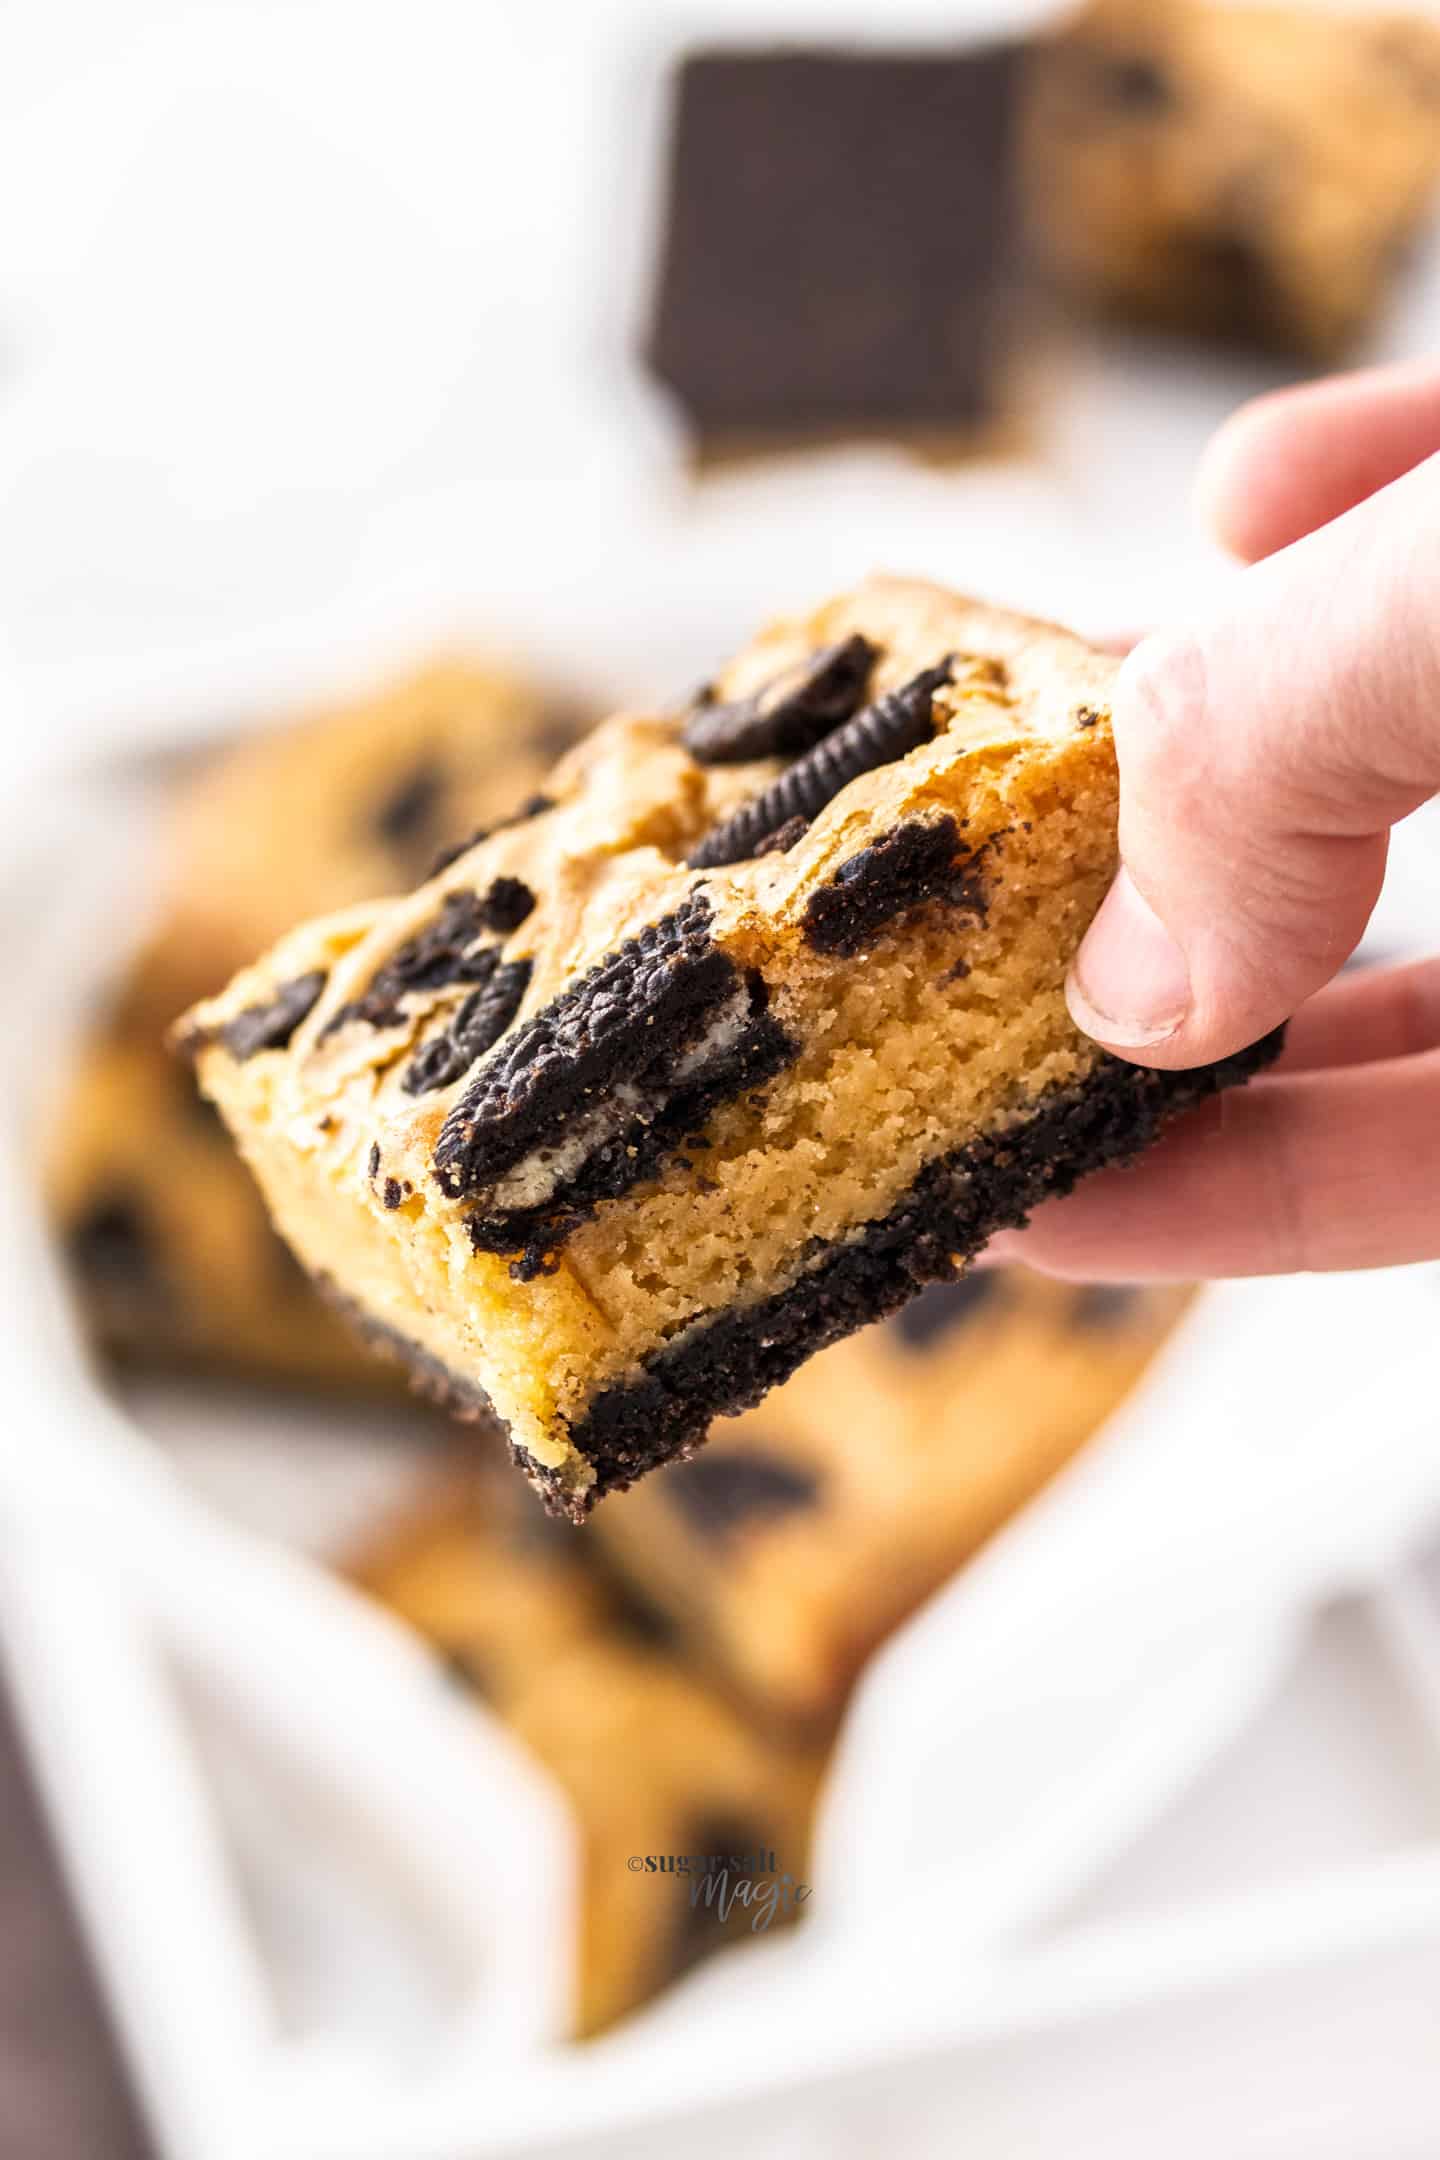 A hand holding an Oreo blondie, showing the inside texture.